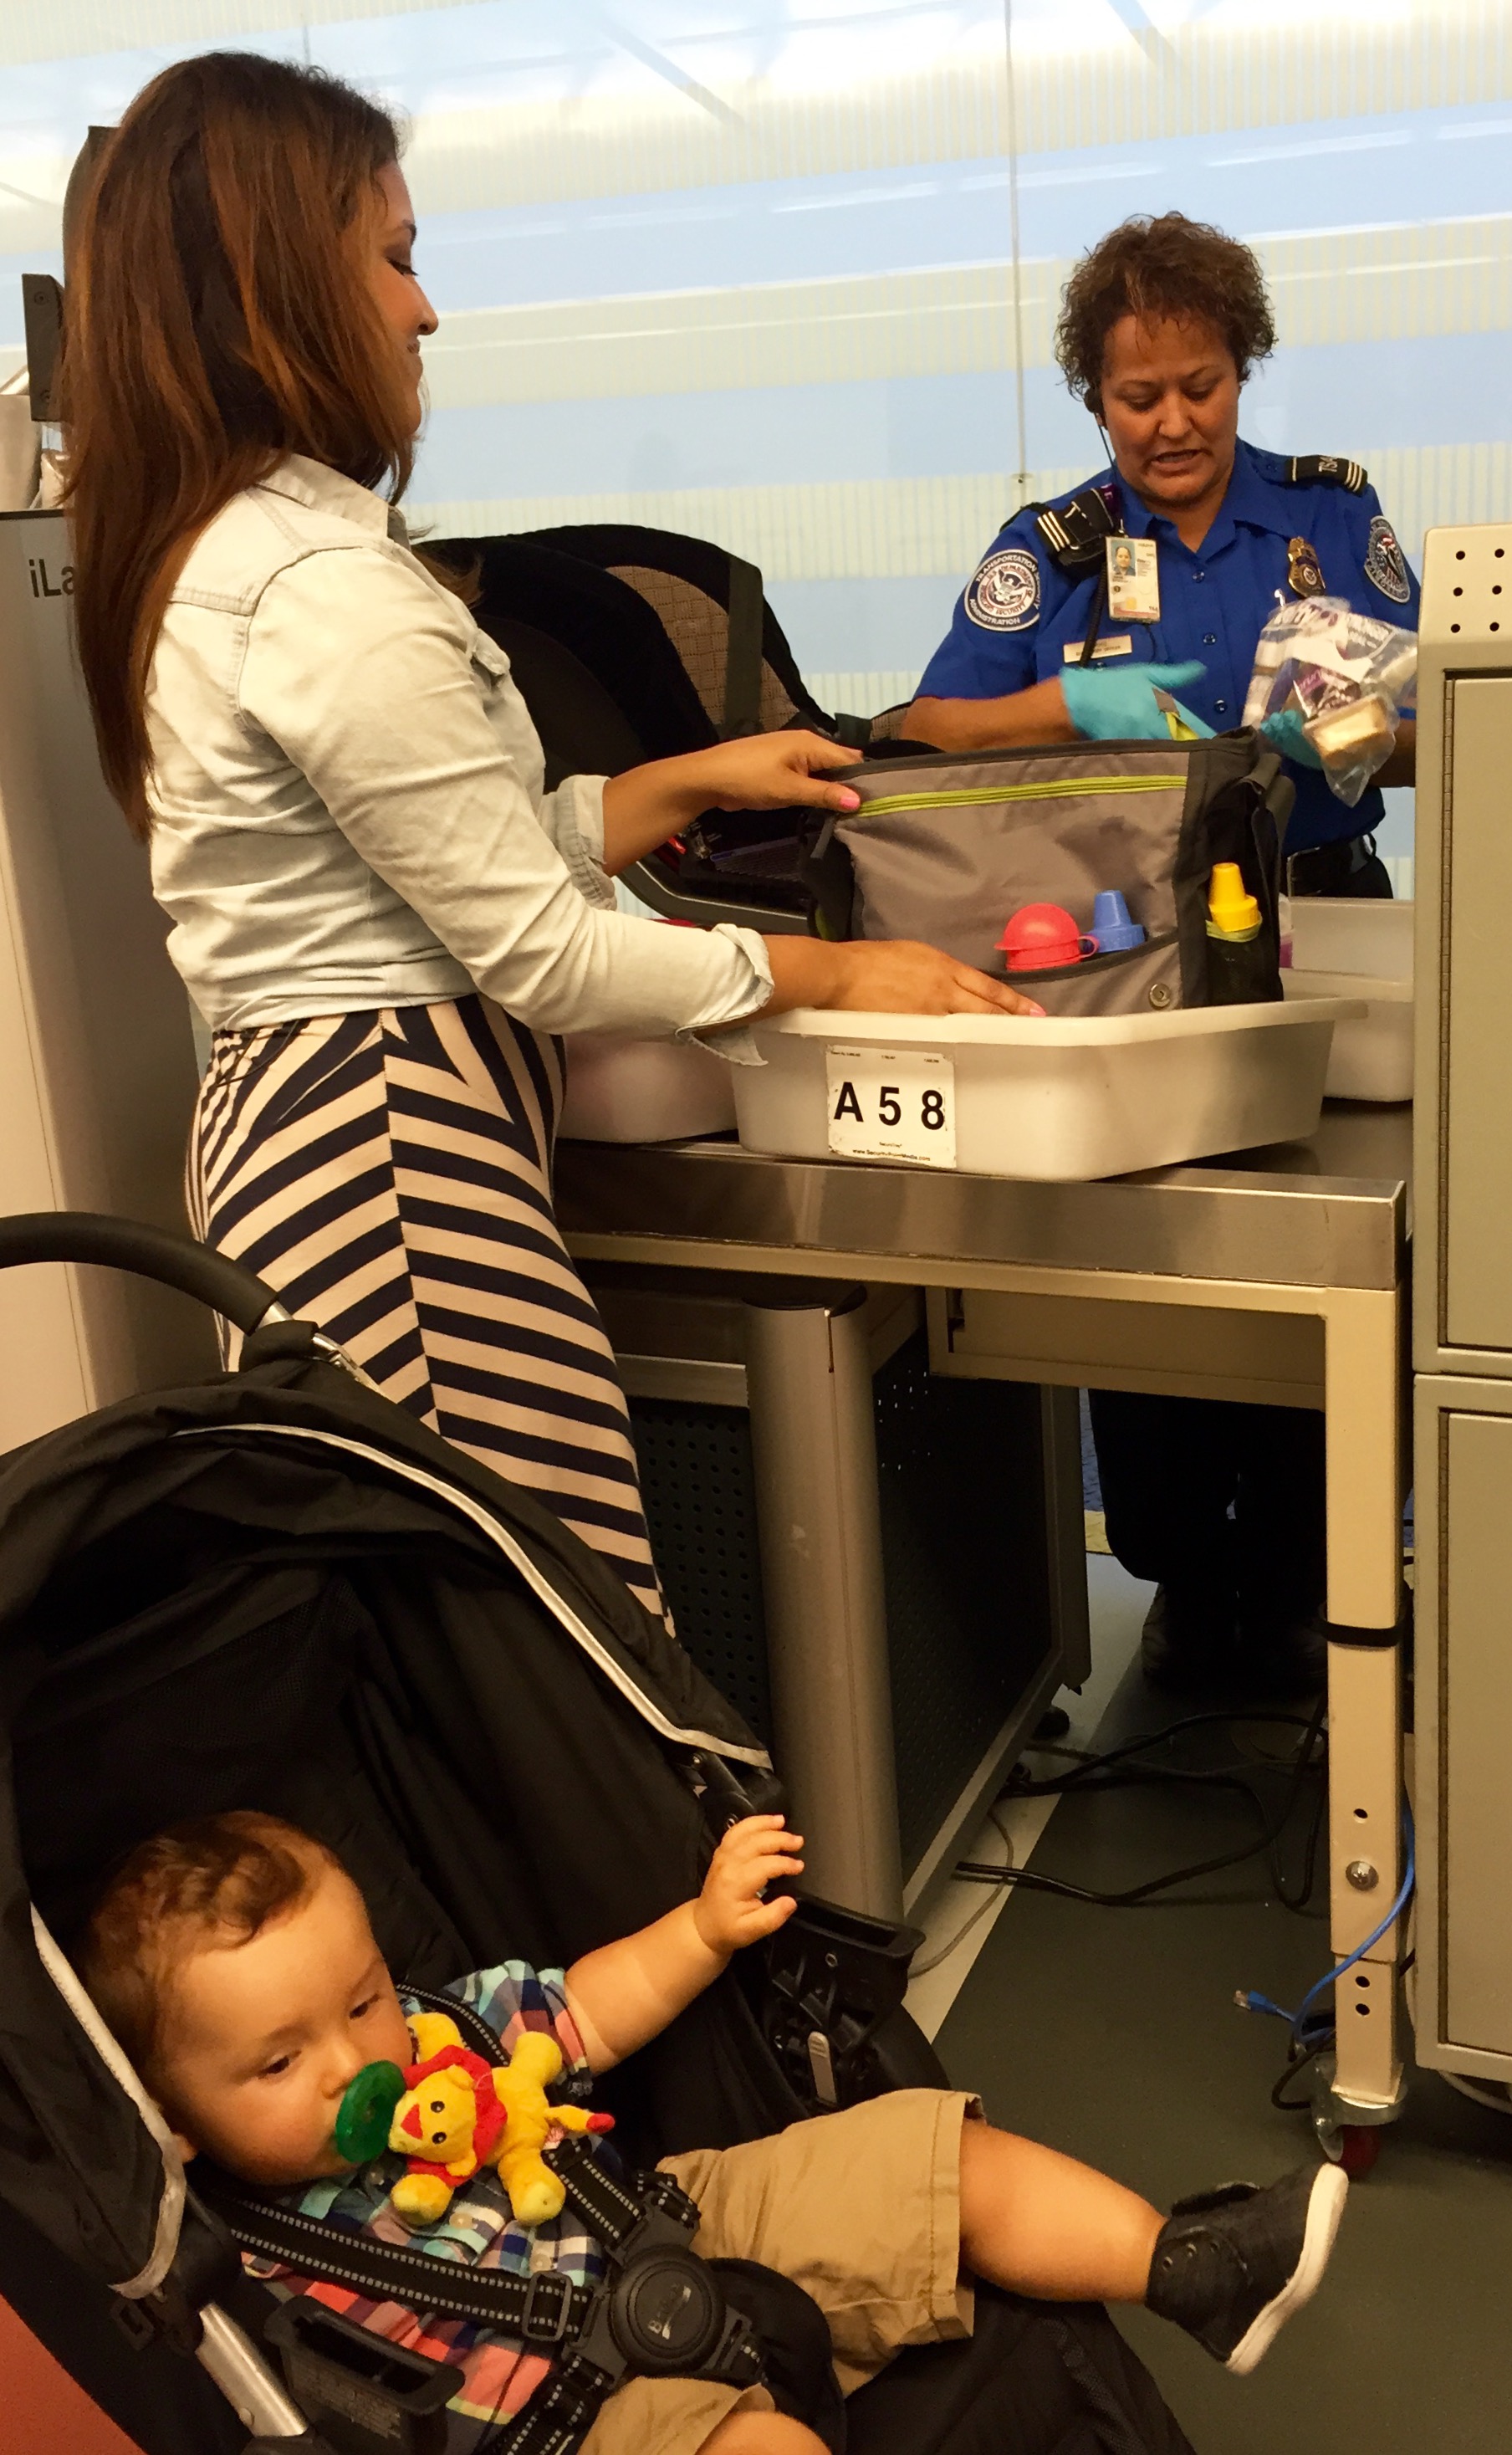 Bring the bottle through security for baby - Familee Travel